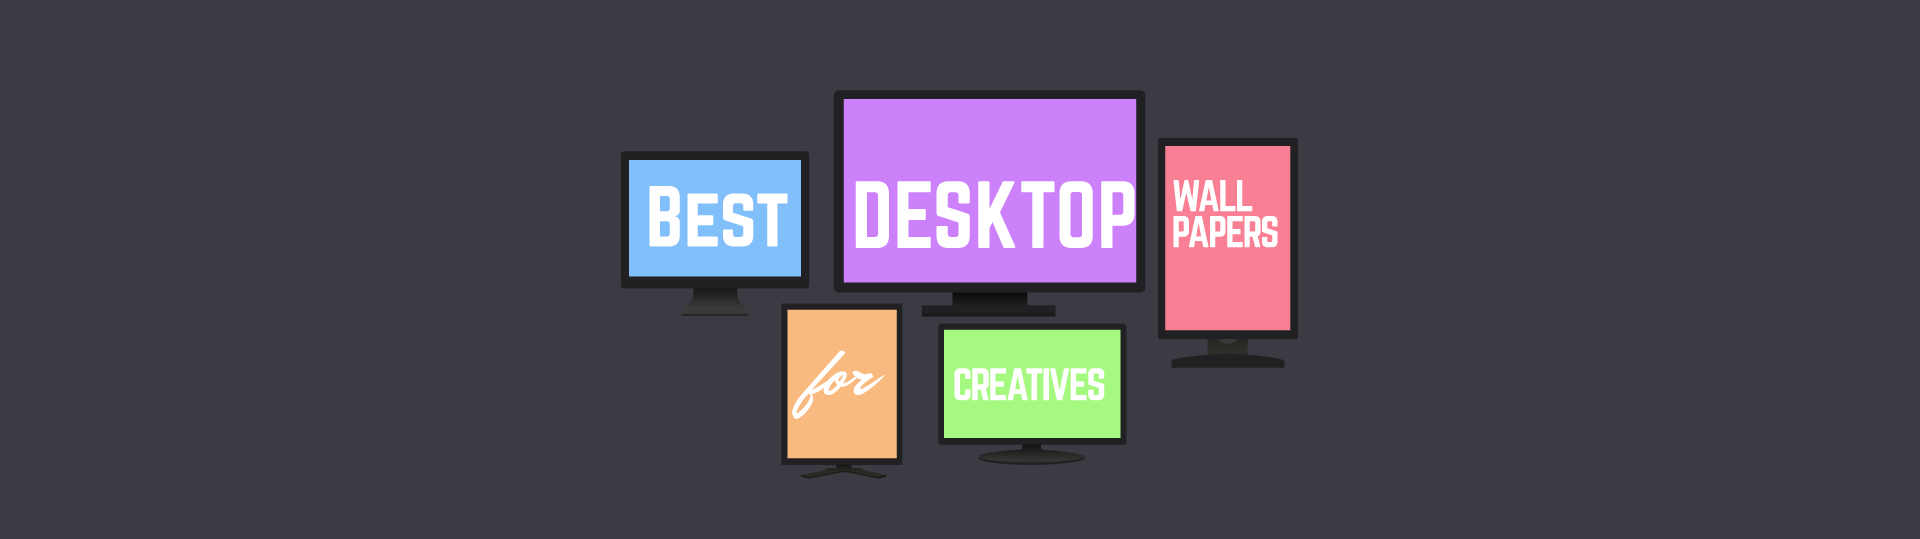 beautiful free wallpaper for creatives